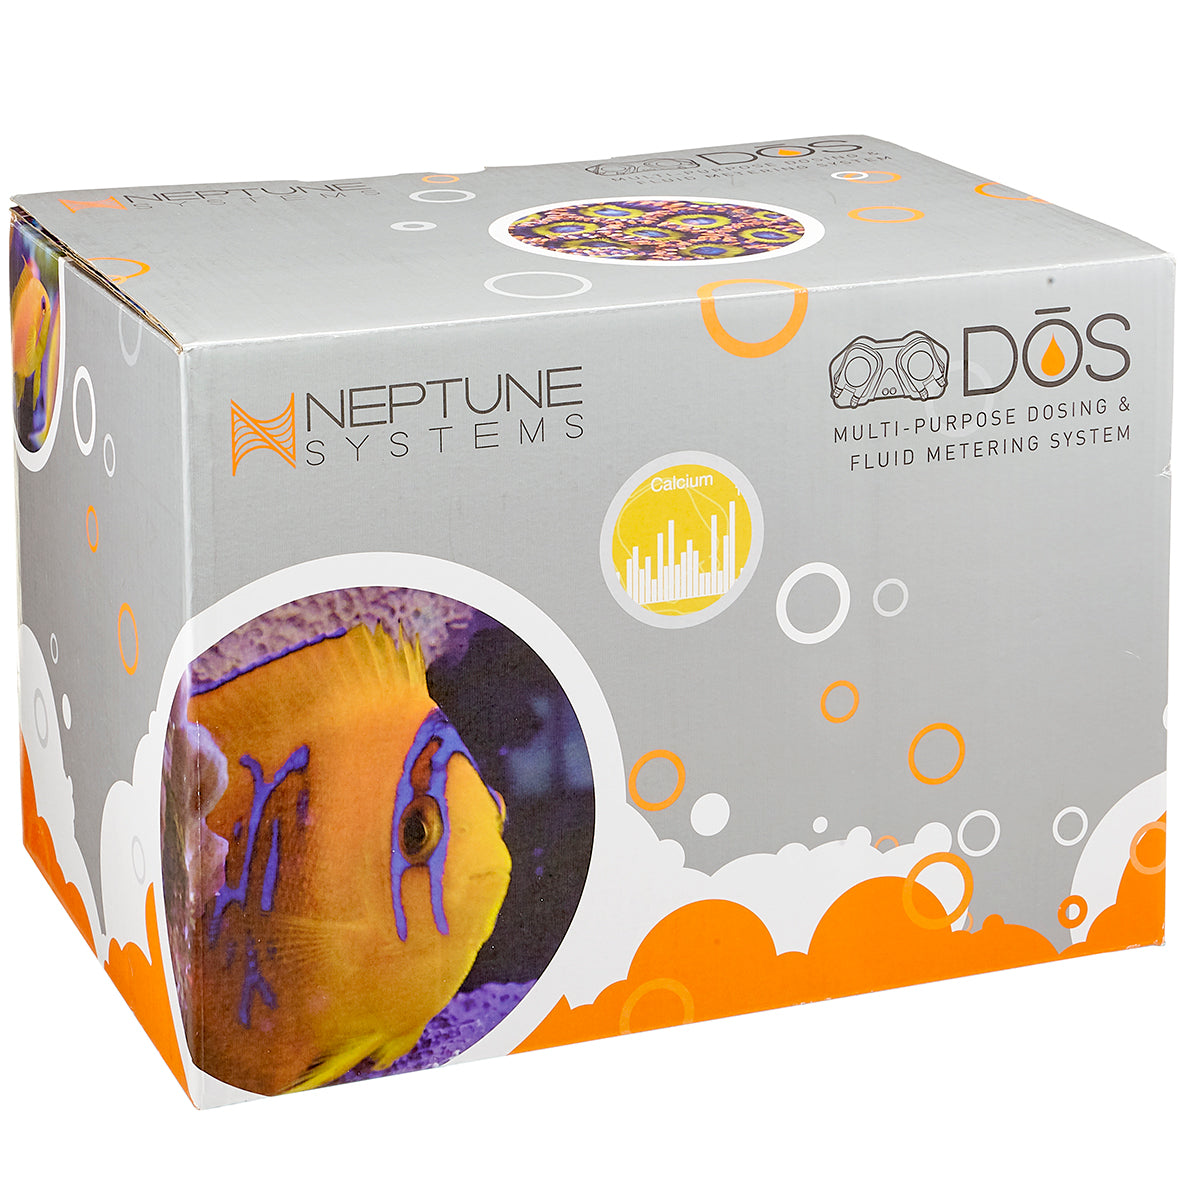 DOS Dosing and Fluid Metering System - Neptune Systems - Neptune Systems